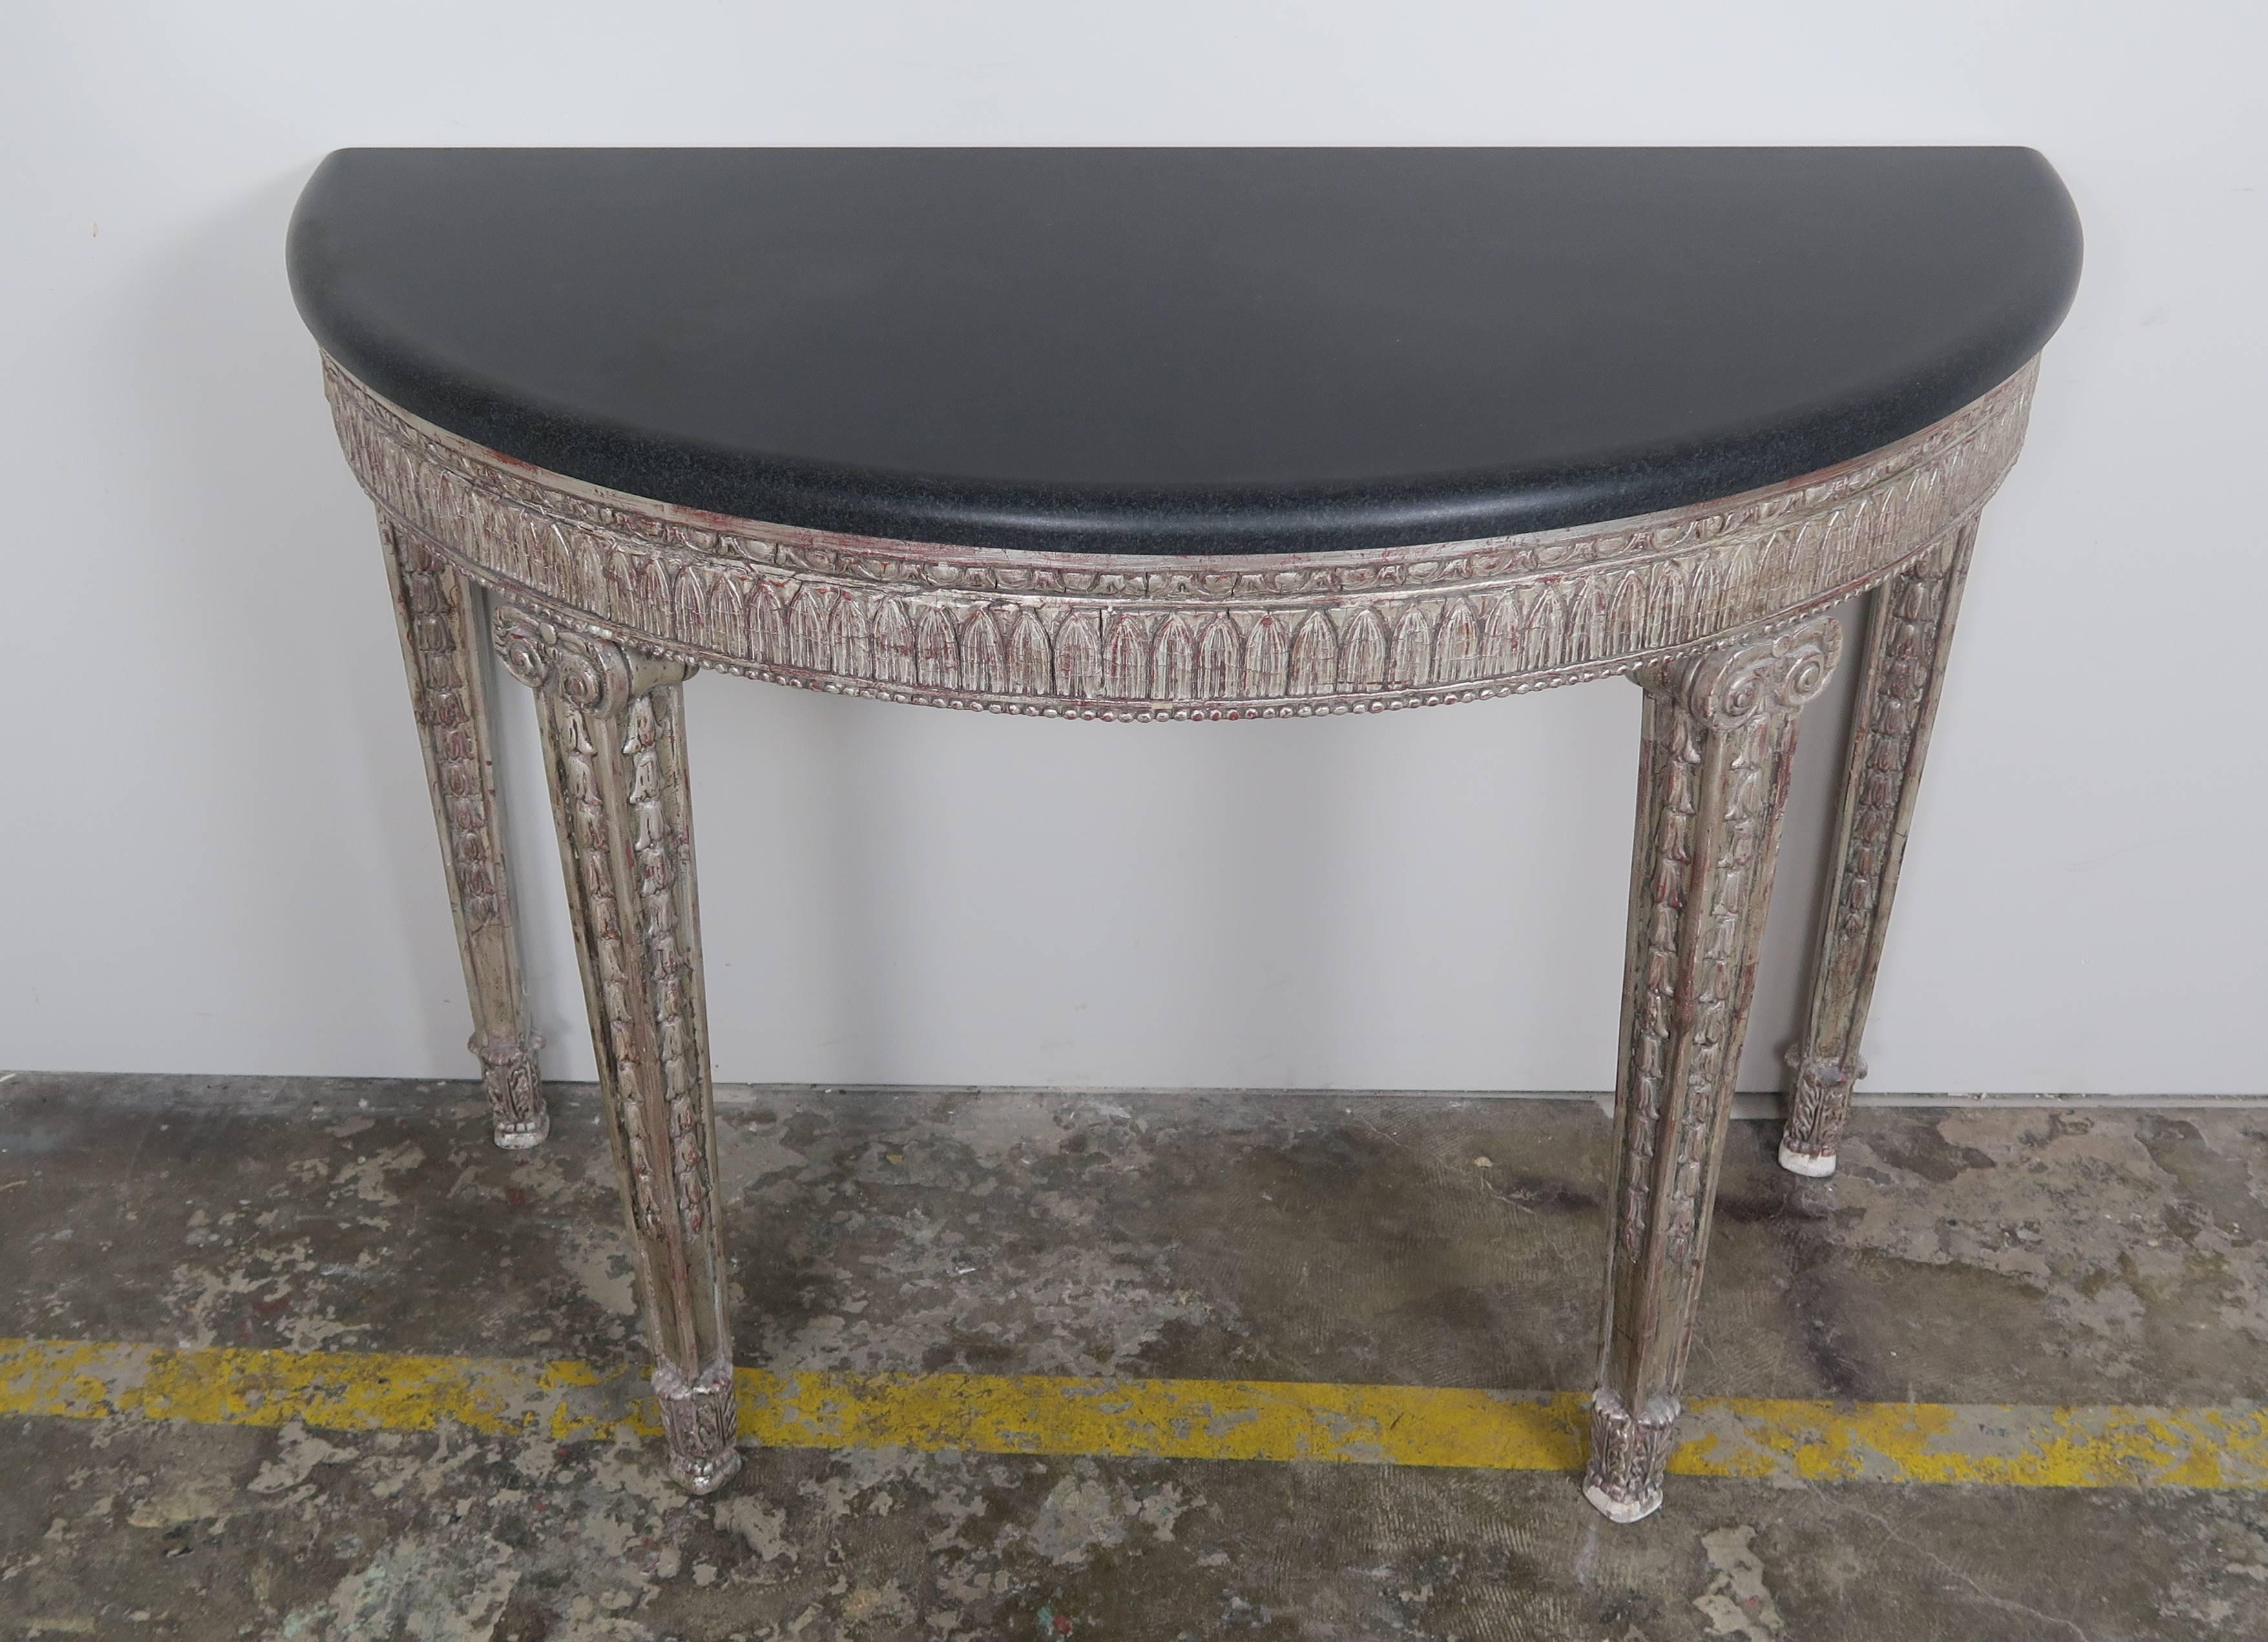 Italian neoclassical style silver gilt carved console standing on four straight legs with a black stone top. Egg and dart carved details across the apron of the console. Bullnose edge detail on black marble top.